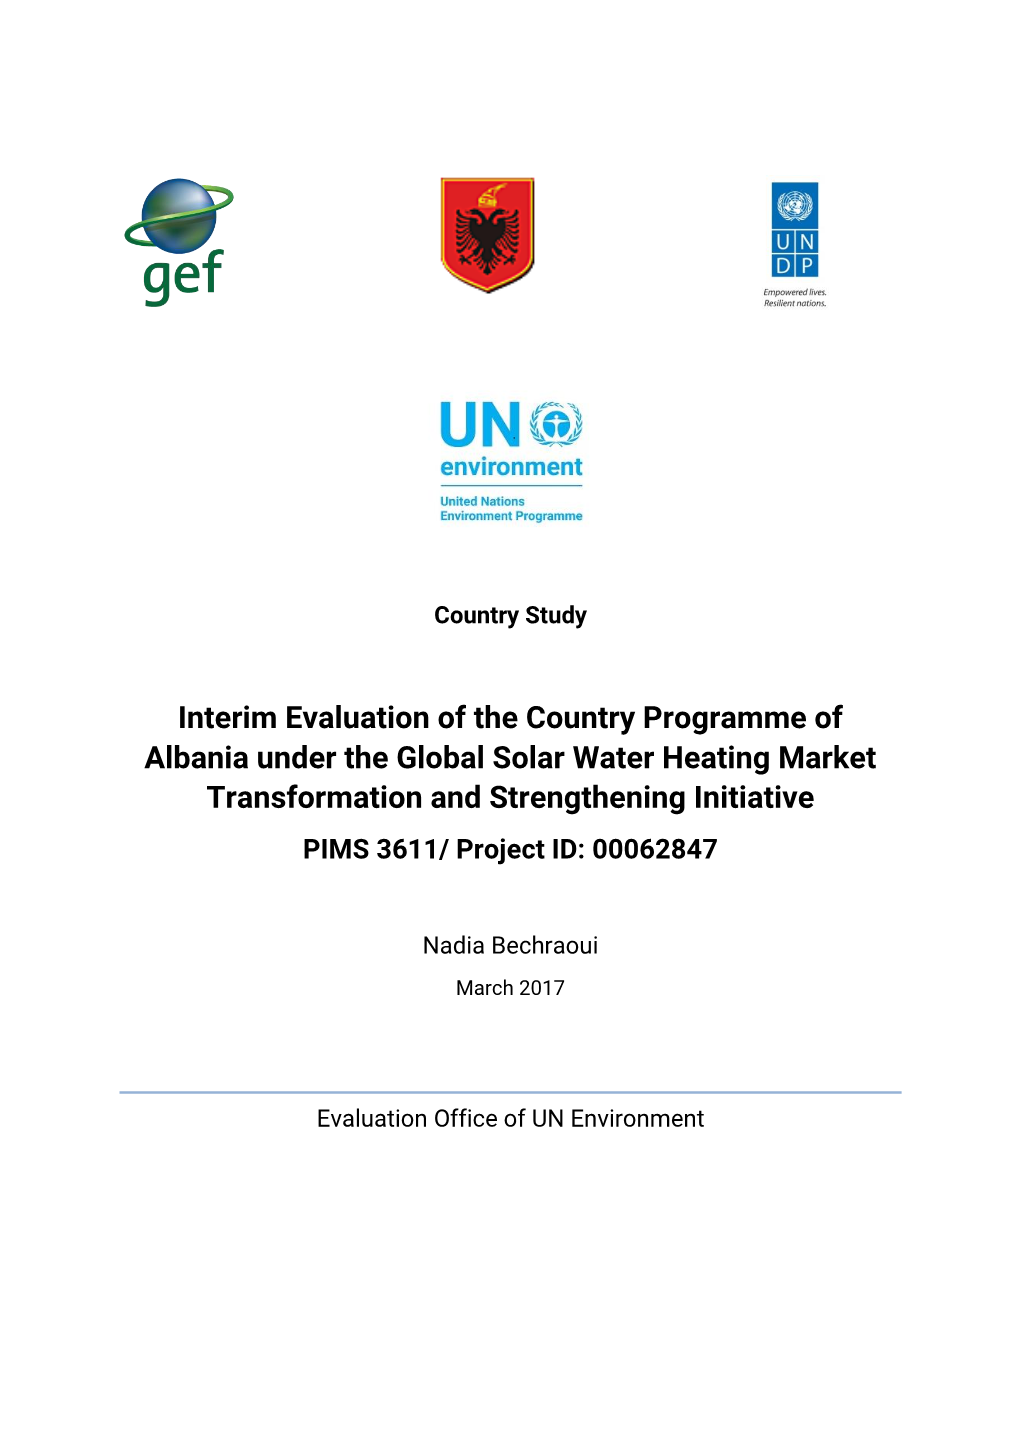 Interim Evaluation of the Country Programme of Albania Under The